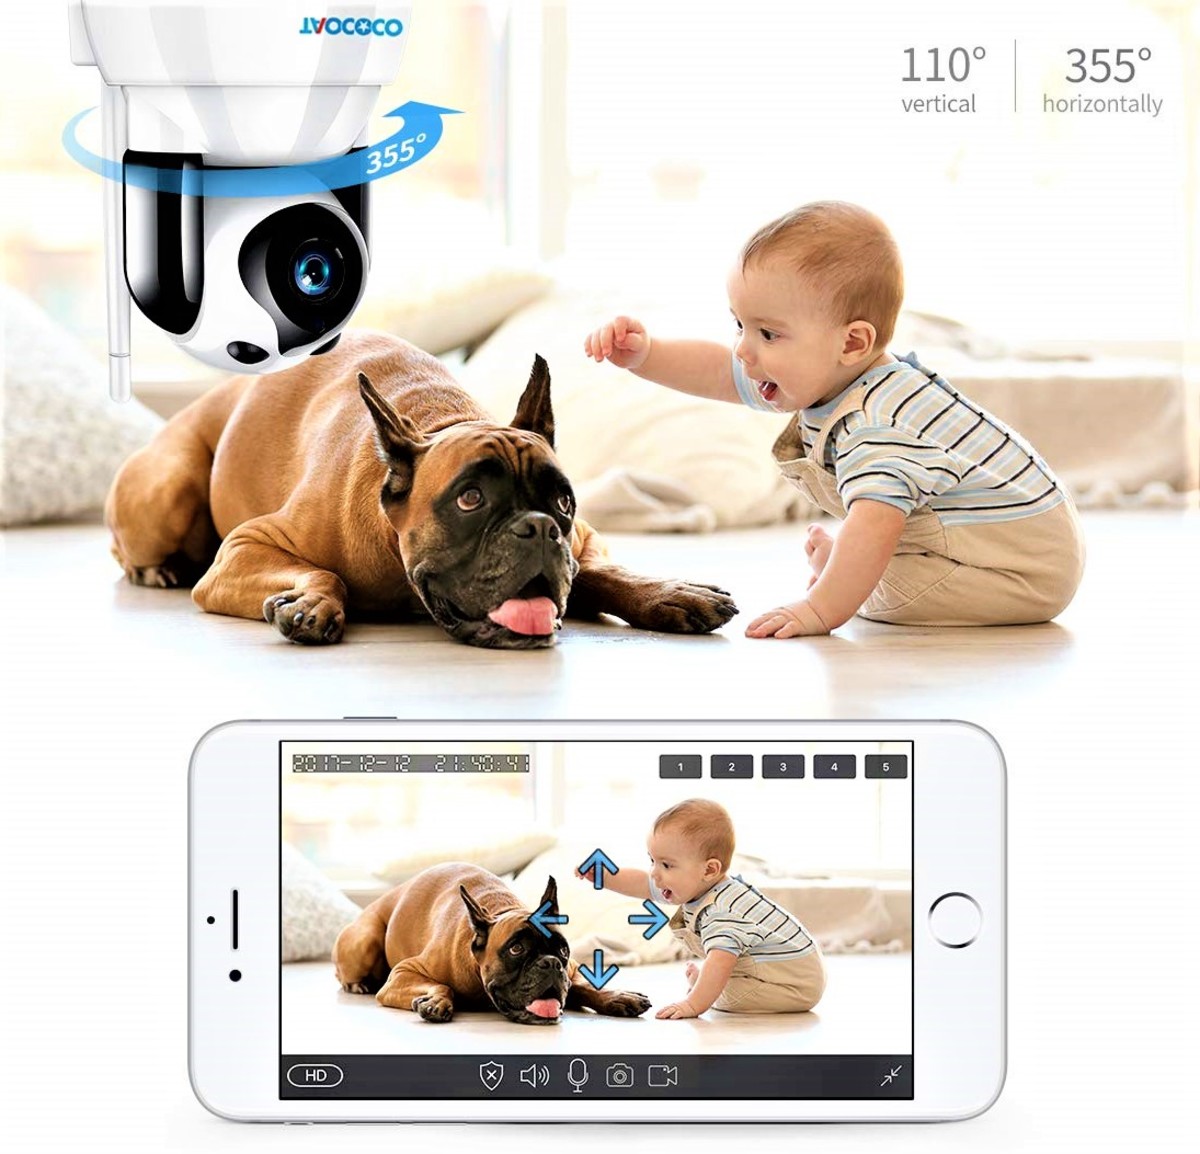 taococo-dog-camera-review-top-rated-baby-monitor-for-pets-kids